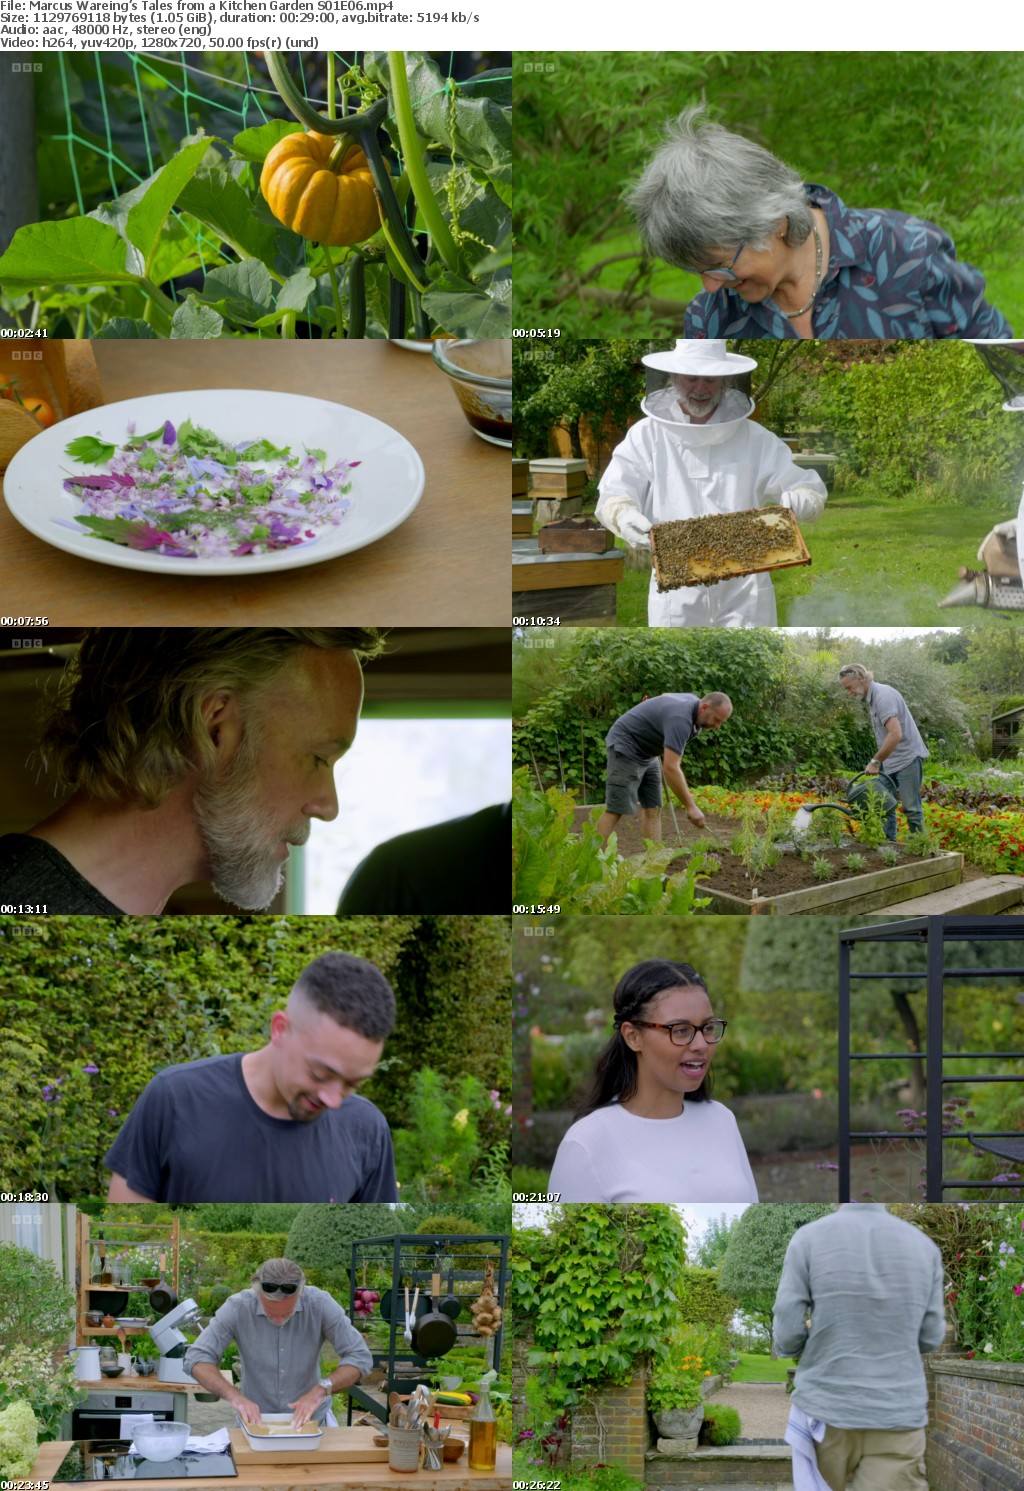 Marcus Wareings Tales from a Kitchen Garden S01E06 (1280x720p HD, 50fps, soft Eng subs)